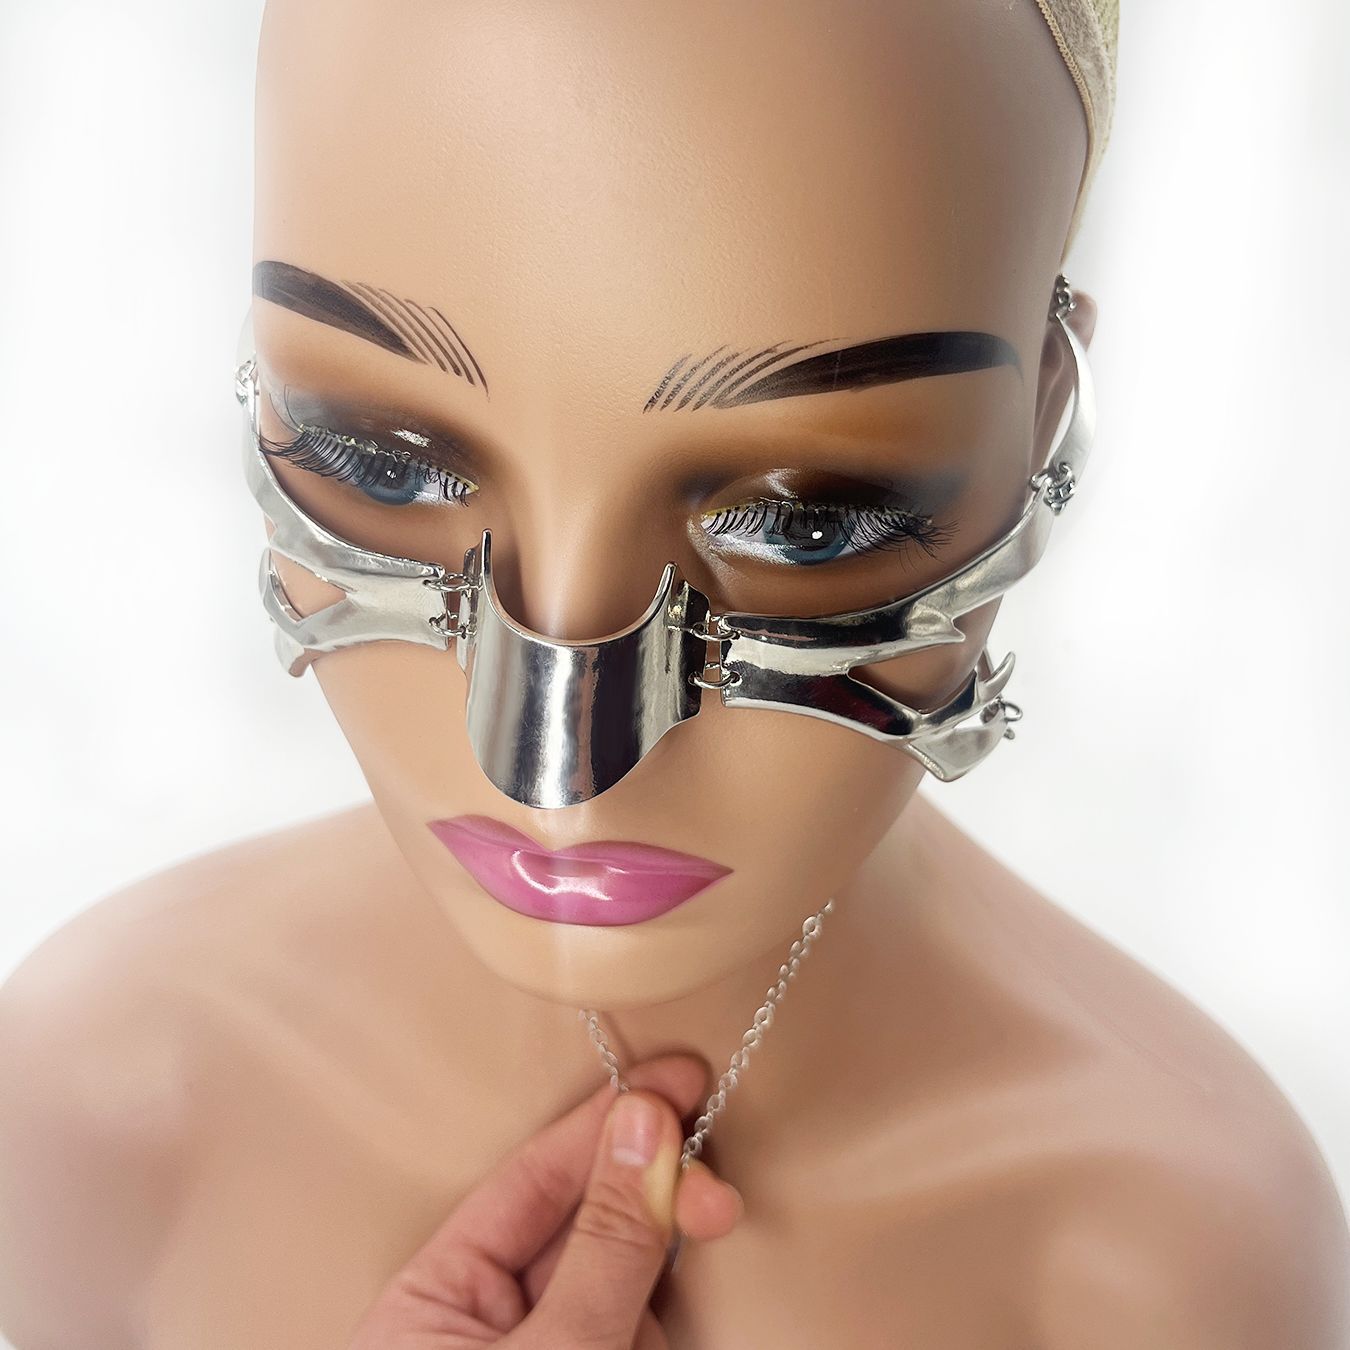 A mannequin head wears a metallic facial accessory, like an intricate alloy mask, covering the nose and cheeks. A hand is holding a chain attached to it. The Adjustable Irregular Fluid Lip Ring Mask from Maramalive™ features multiple segments and hinges, perfect for dressing up in a unique style.